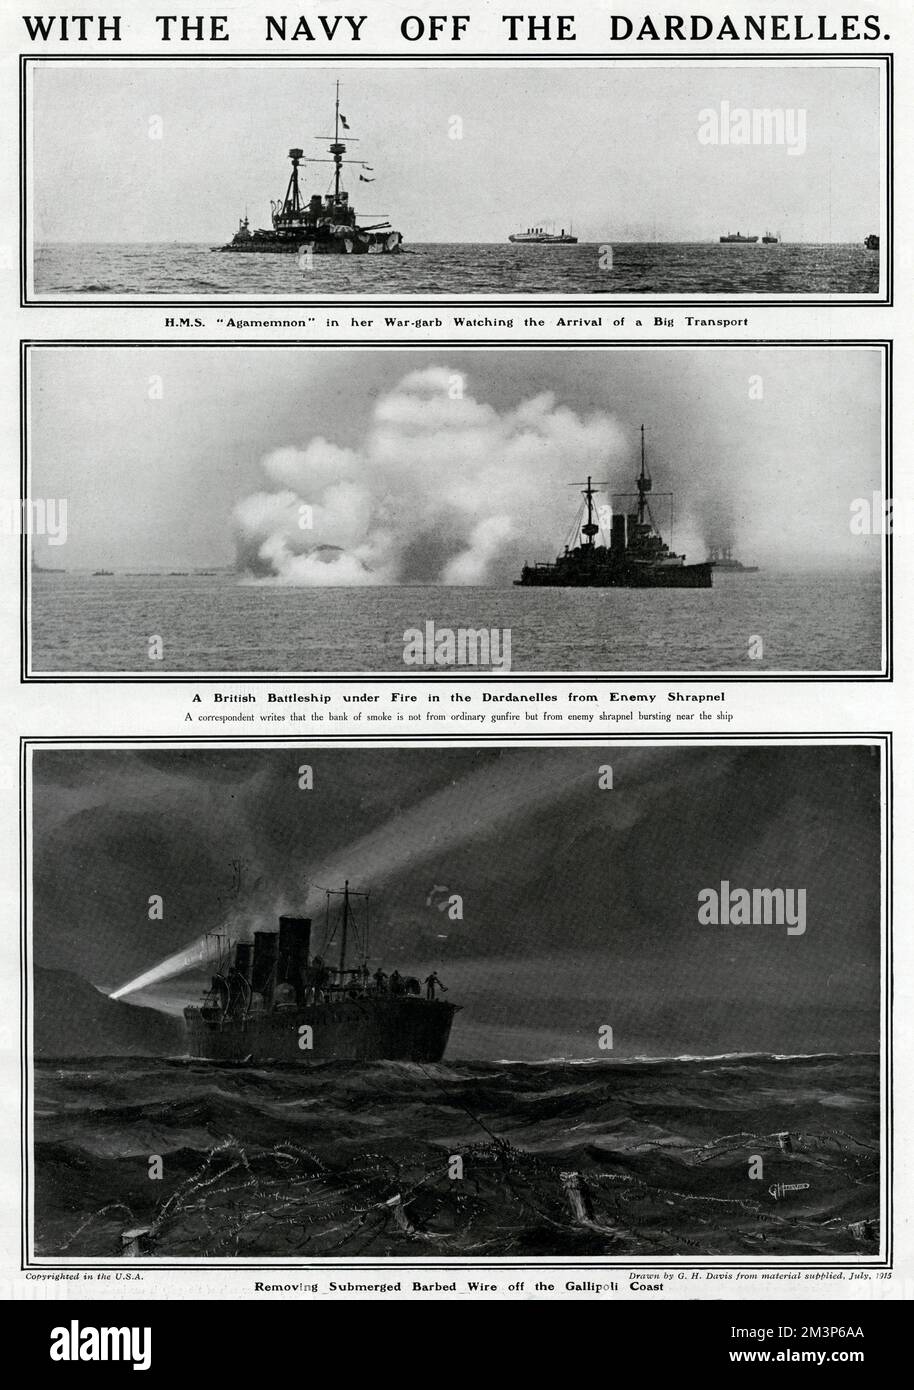 With the British navy off the Dardanelles during the First World War.  Top: HMS Agamemnon and the arrival of a big transport.  Middle: a British battleship under fire from enemy shrapnel.  Bottom: removing submerged barbed wire off the Gallipoli coast.       Date: 1915 Stock Photo